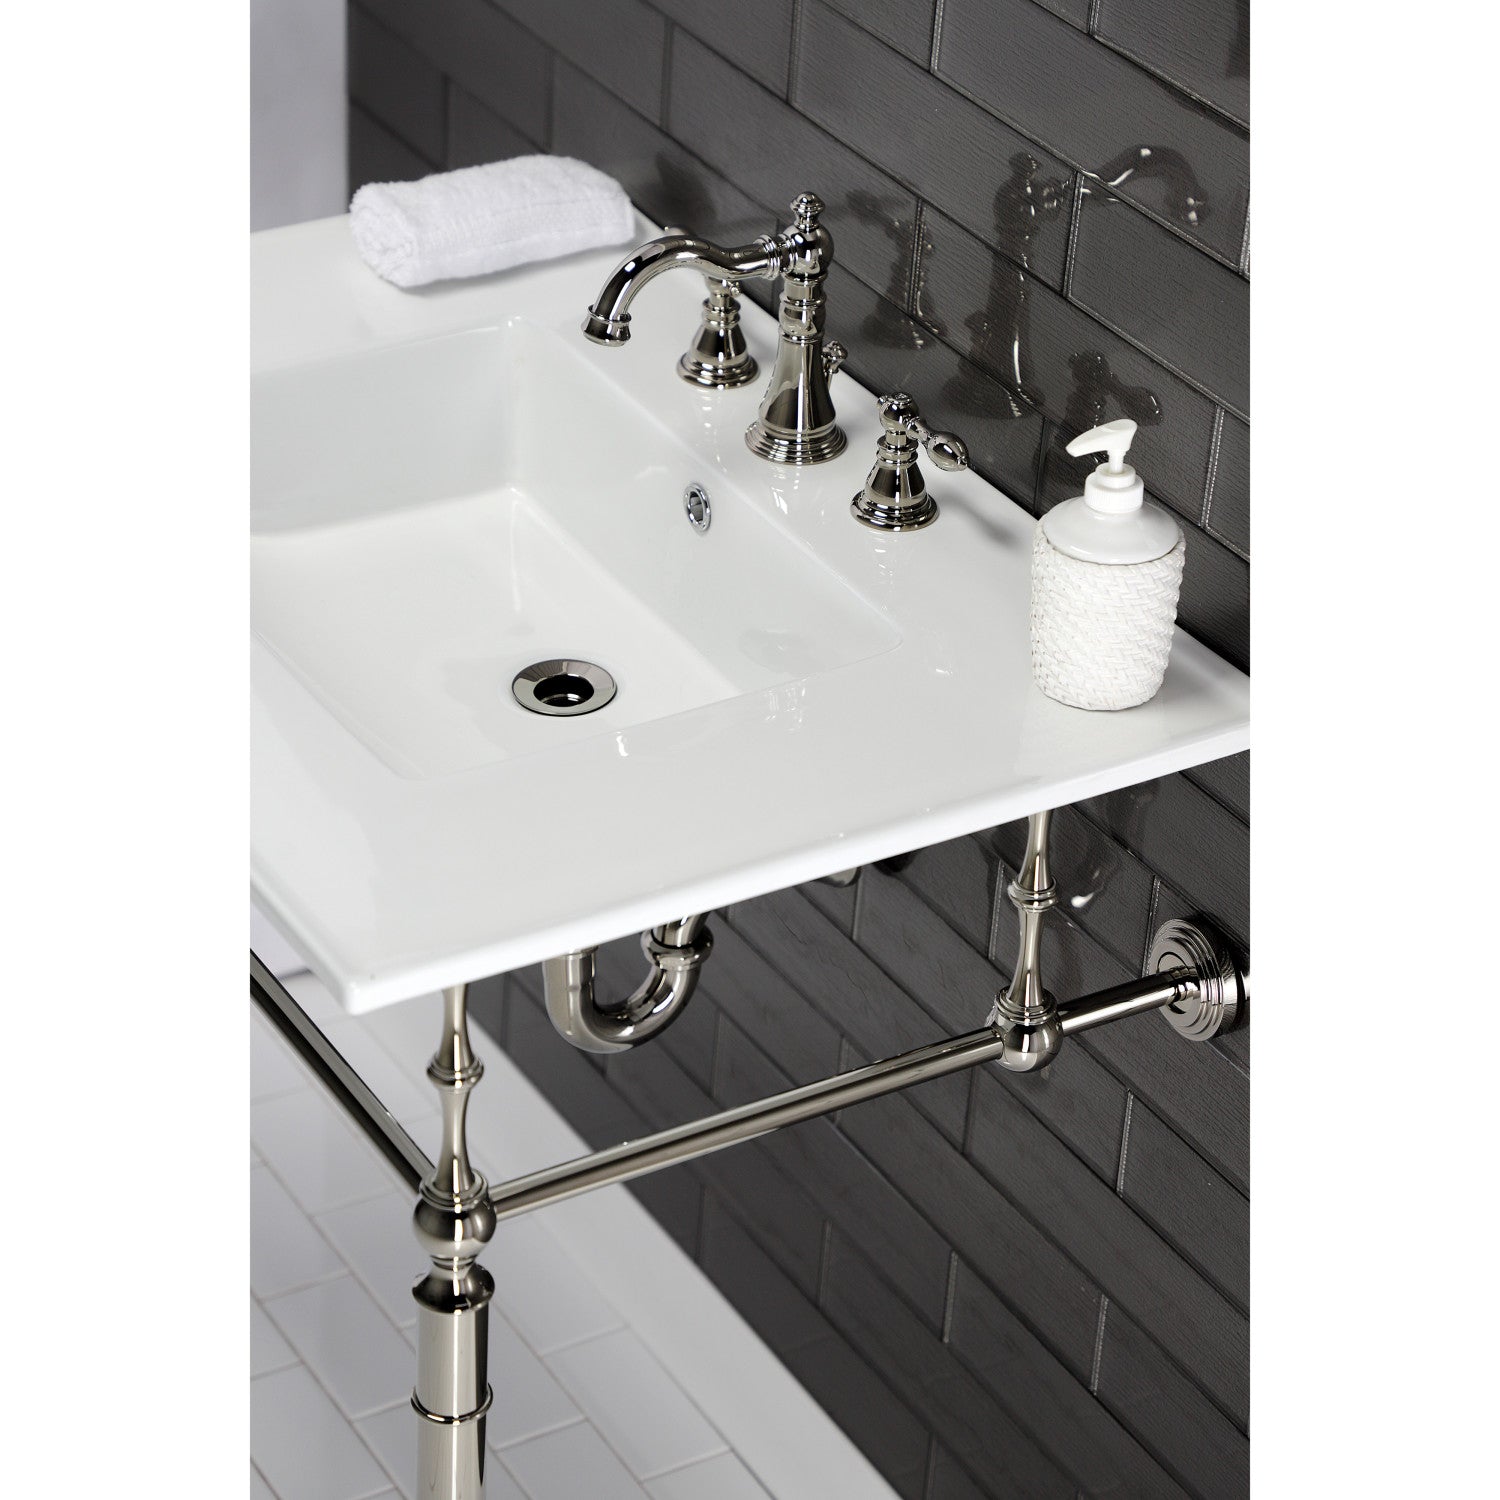 Small Console Sinks - Foter